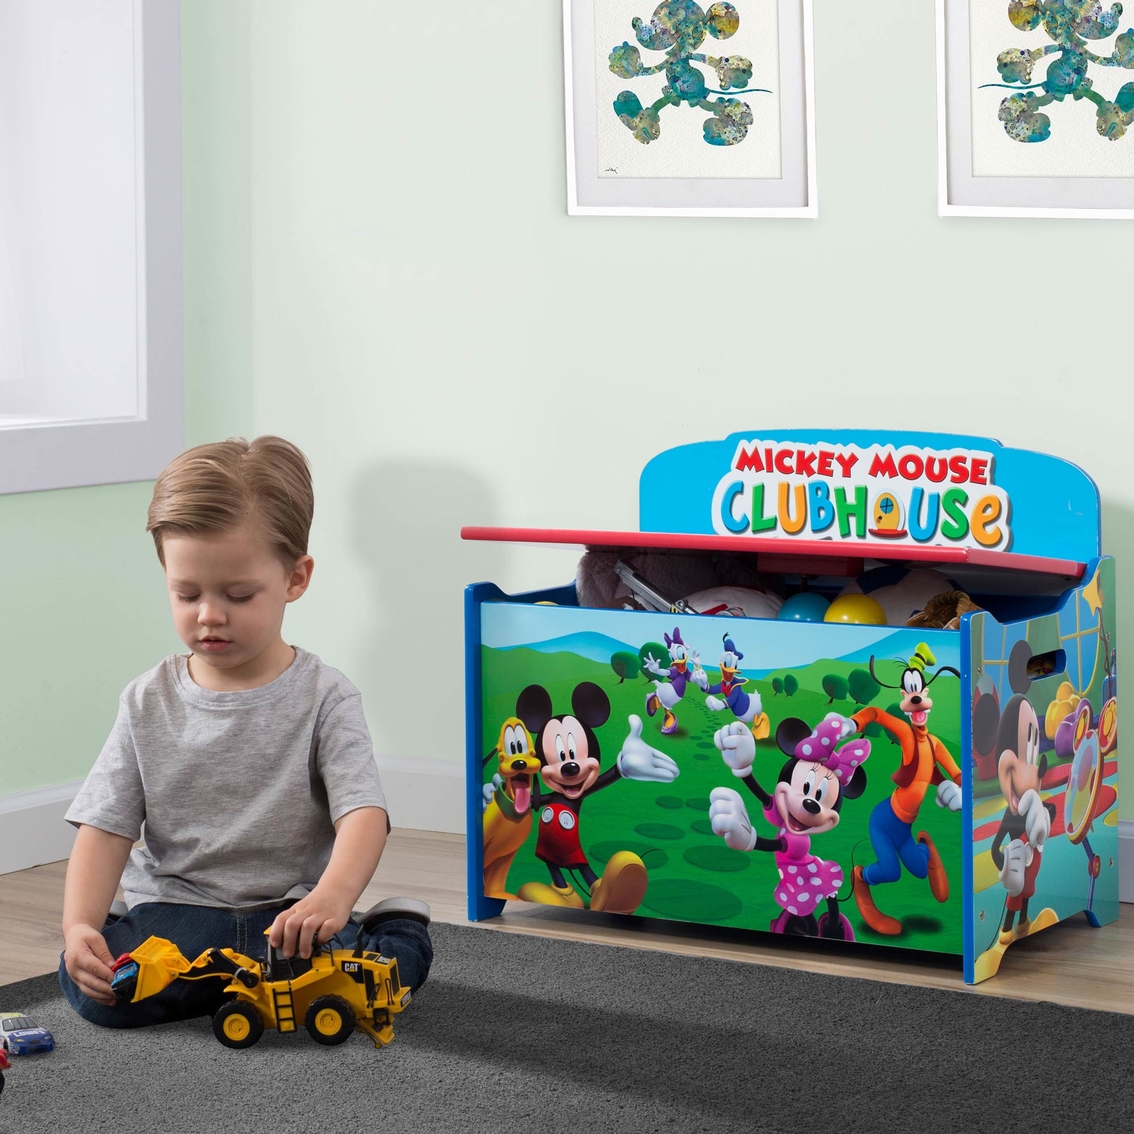 Disney Mickey Mouse Clubhouse Deluxe Toy Box - Image 4 of 4